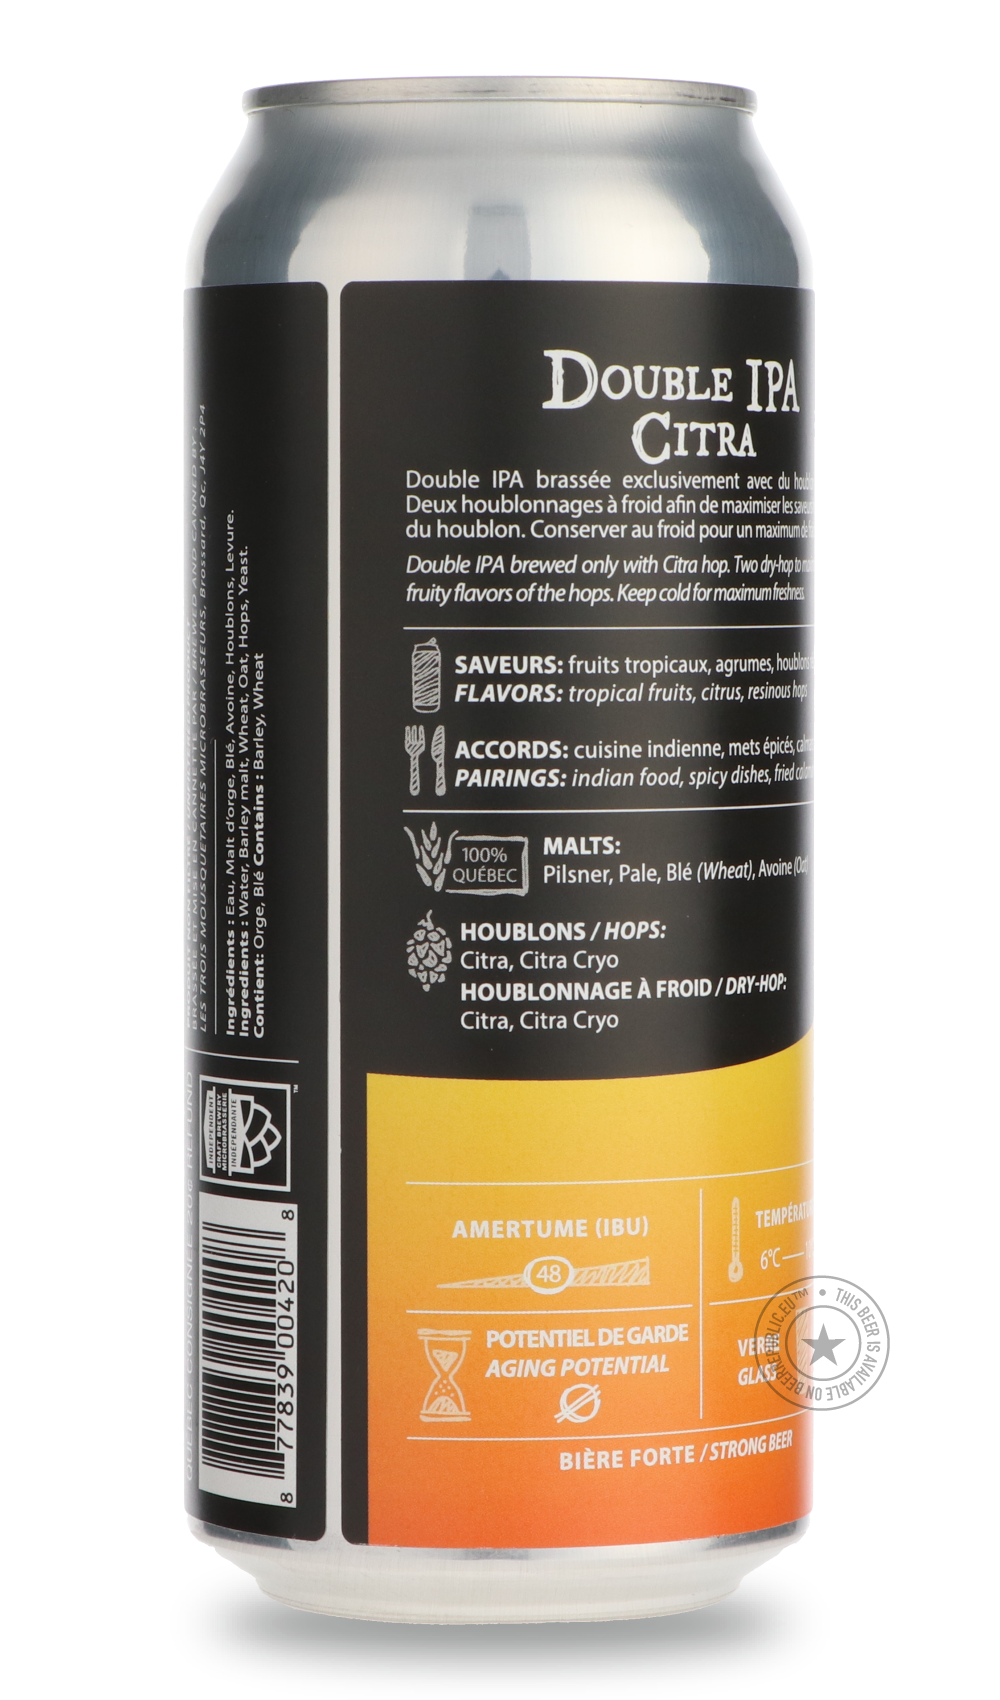 -Les Trois Mousquetaires- Double IPA Citra-IPA- Only @ Beer Republic - The best online beer store for American & Canadian craft beer - Buy beer online from the USA and Canada - Bier online kopen - Amerikaans bier kopen - Craft beer store - Craft beer kopen - Amerikanisch bier kaufen - Bier online kaufen - Acheter biere online - IPA - Stout - Porter - New England IPA - Hazy IPA - Imperial Stout - Barrel Aged - Barrel Aged Imperial Stout - Brown - Dark beer - Blond - Blonde - Pilsner - Lager - Wheat - Weizen 